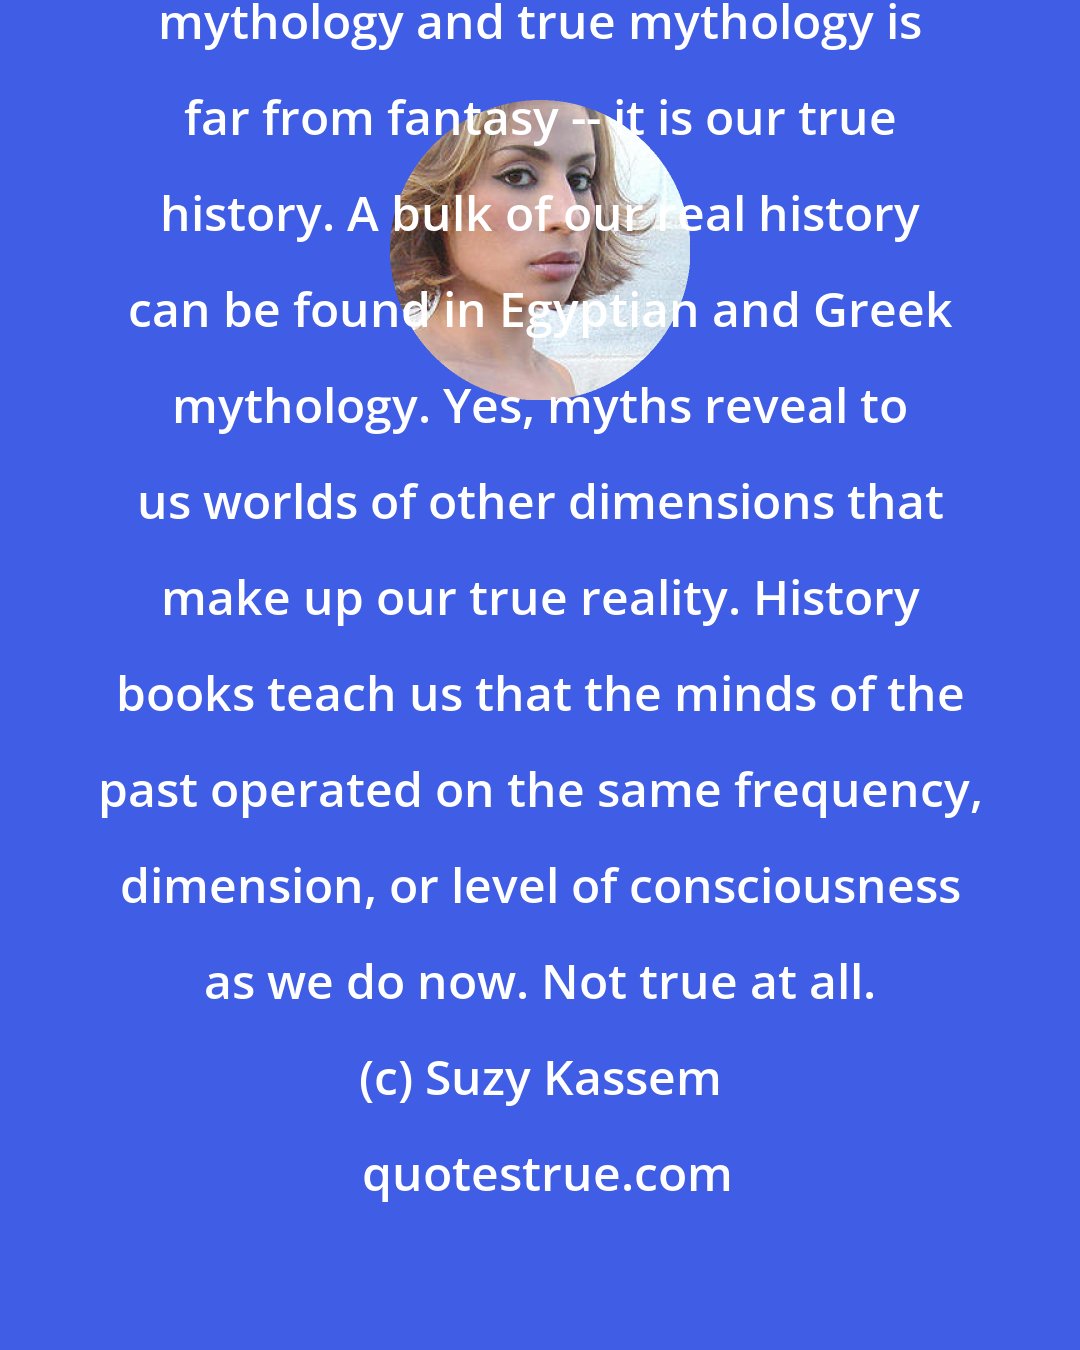 Suzy Kassem: What they teach you as history is mythology and true mythology is far from fantasy -- it is our true history. A bulk of our real history can be found in Egyptian and Greek mythology. Yes, myths reveal to us worlds of other dimensions that make up our true reality. History books teach us that the minds of the past operated on the same frequency, dimension, or level of consciousness as we do now. Not true at all.